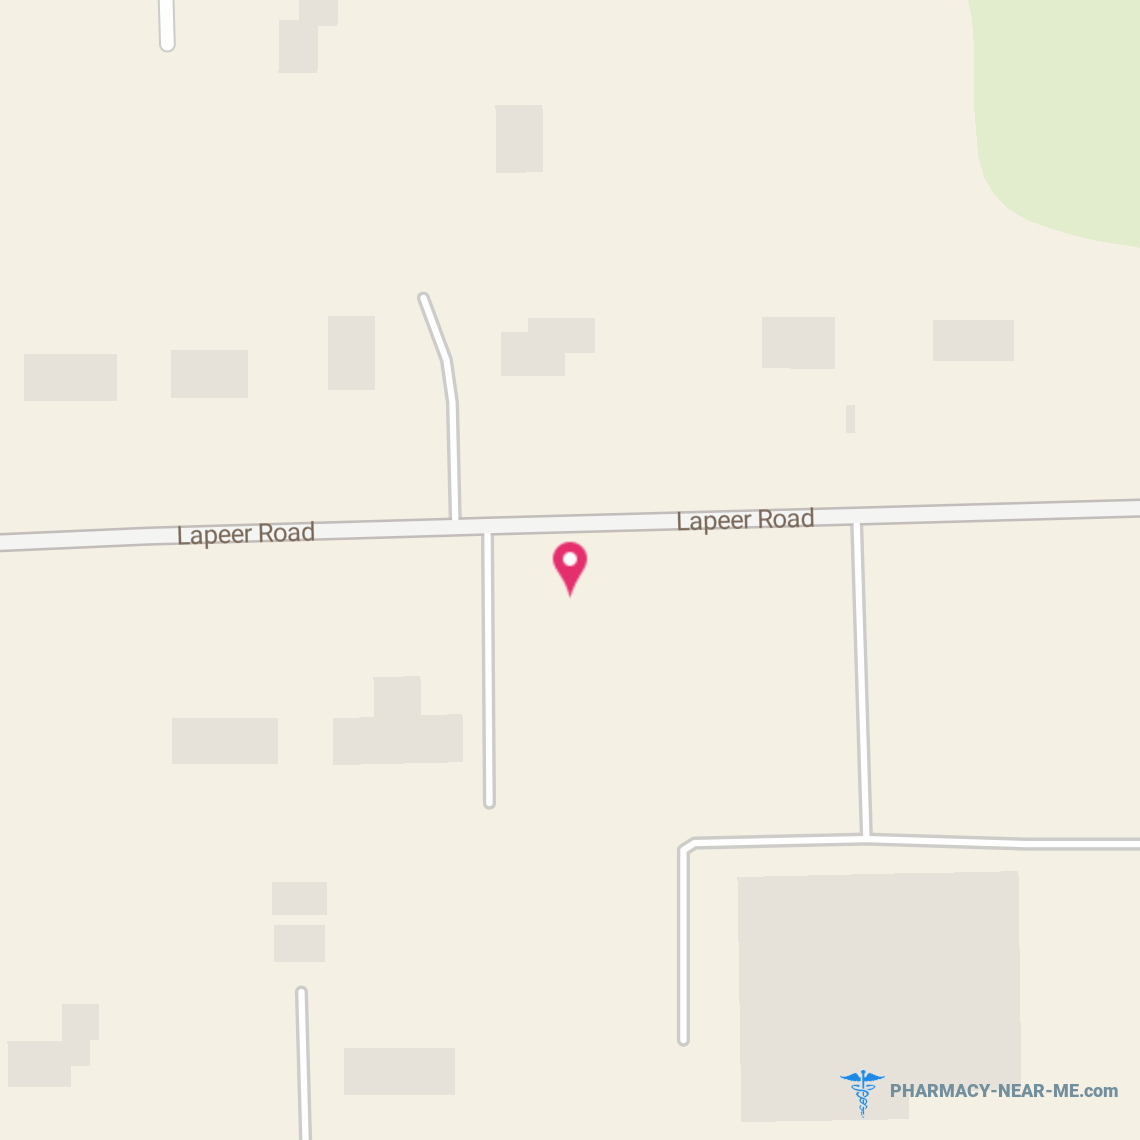 THRIFTY DRUGS - Pharmacy Hours, Phone, Reviews & Information: 5240 Lapeer Road, Burton, Michigan 48509, United States